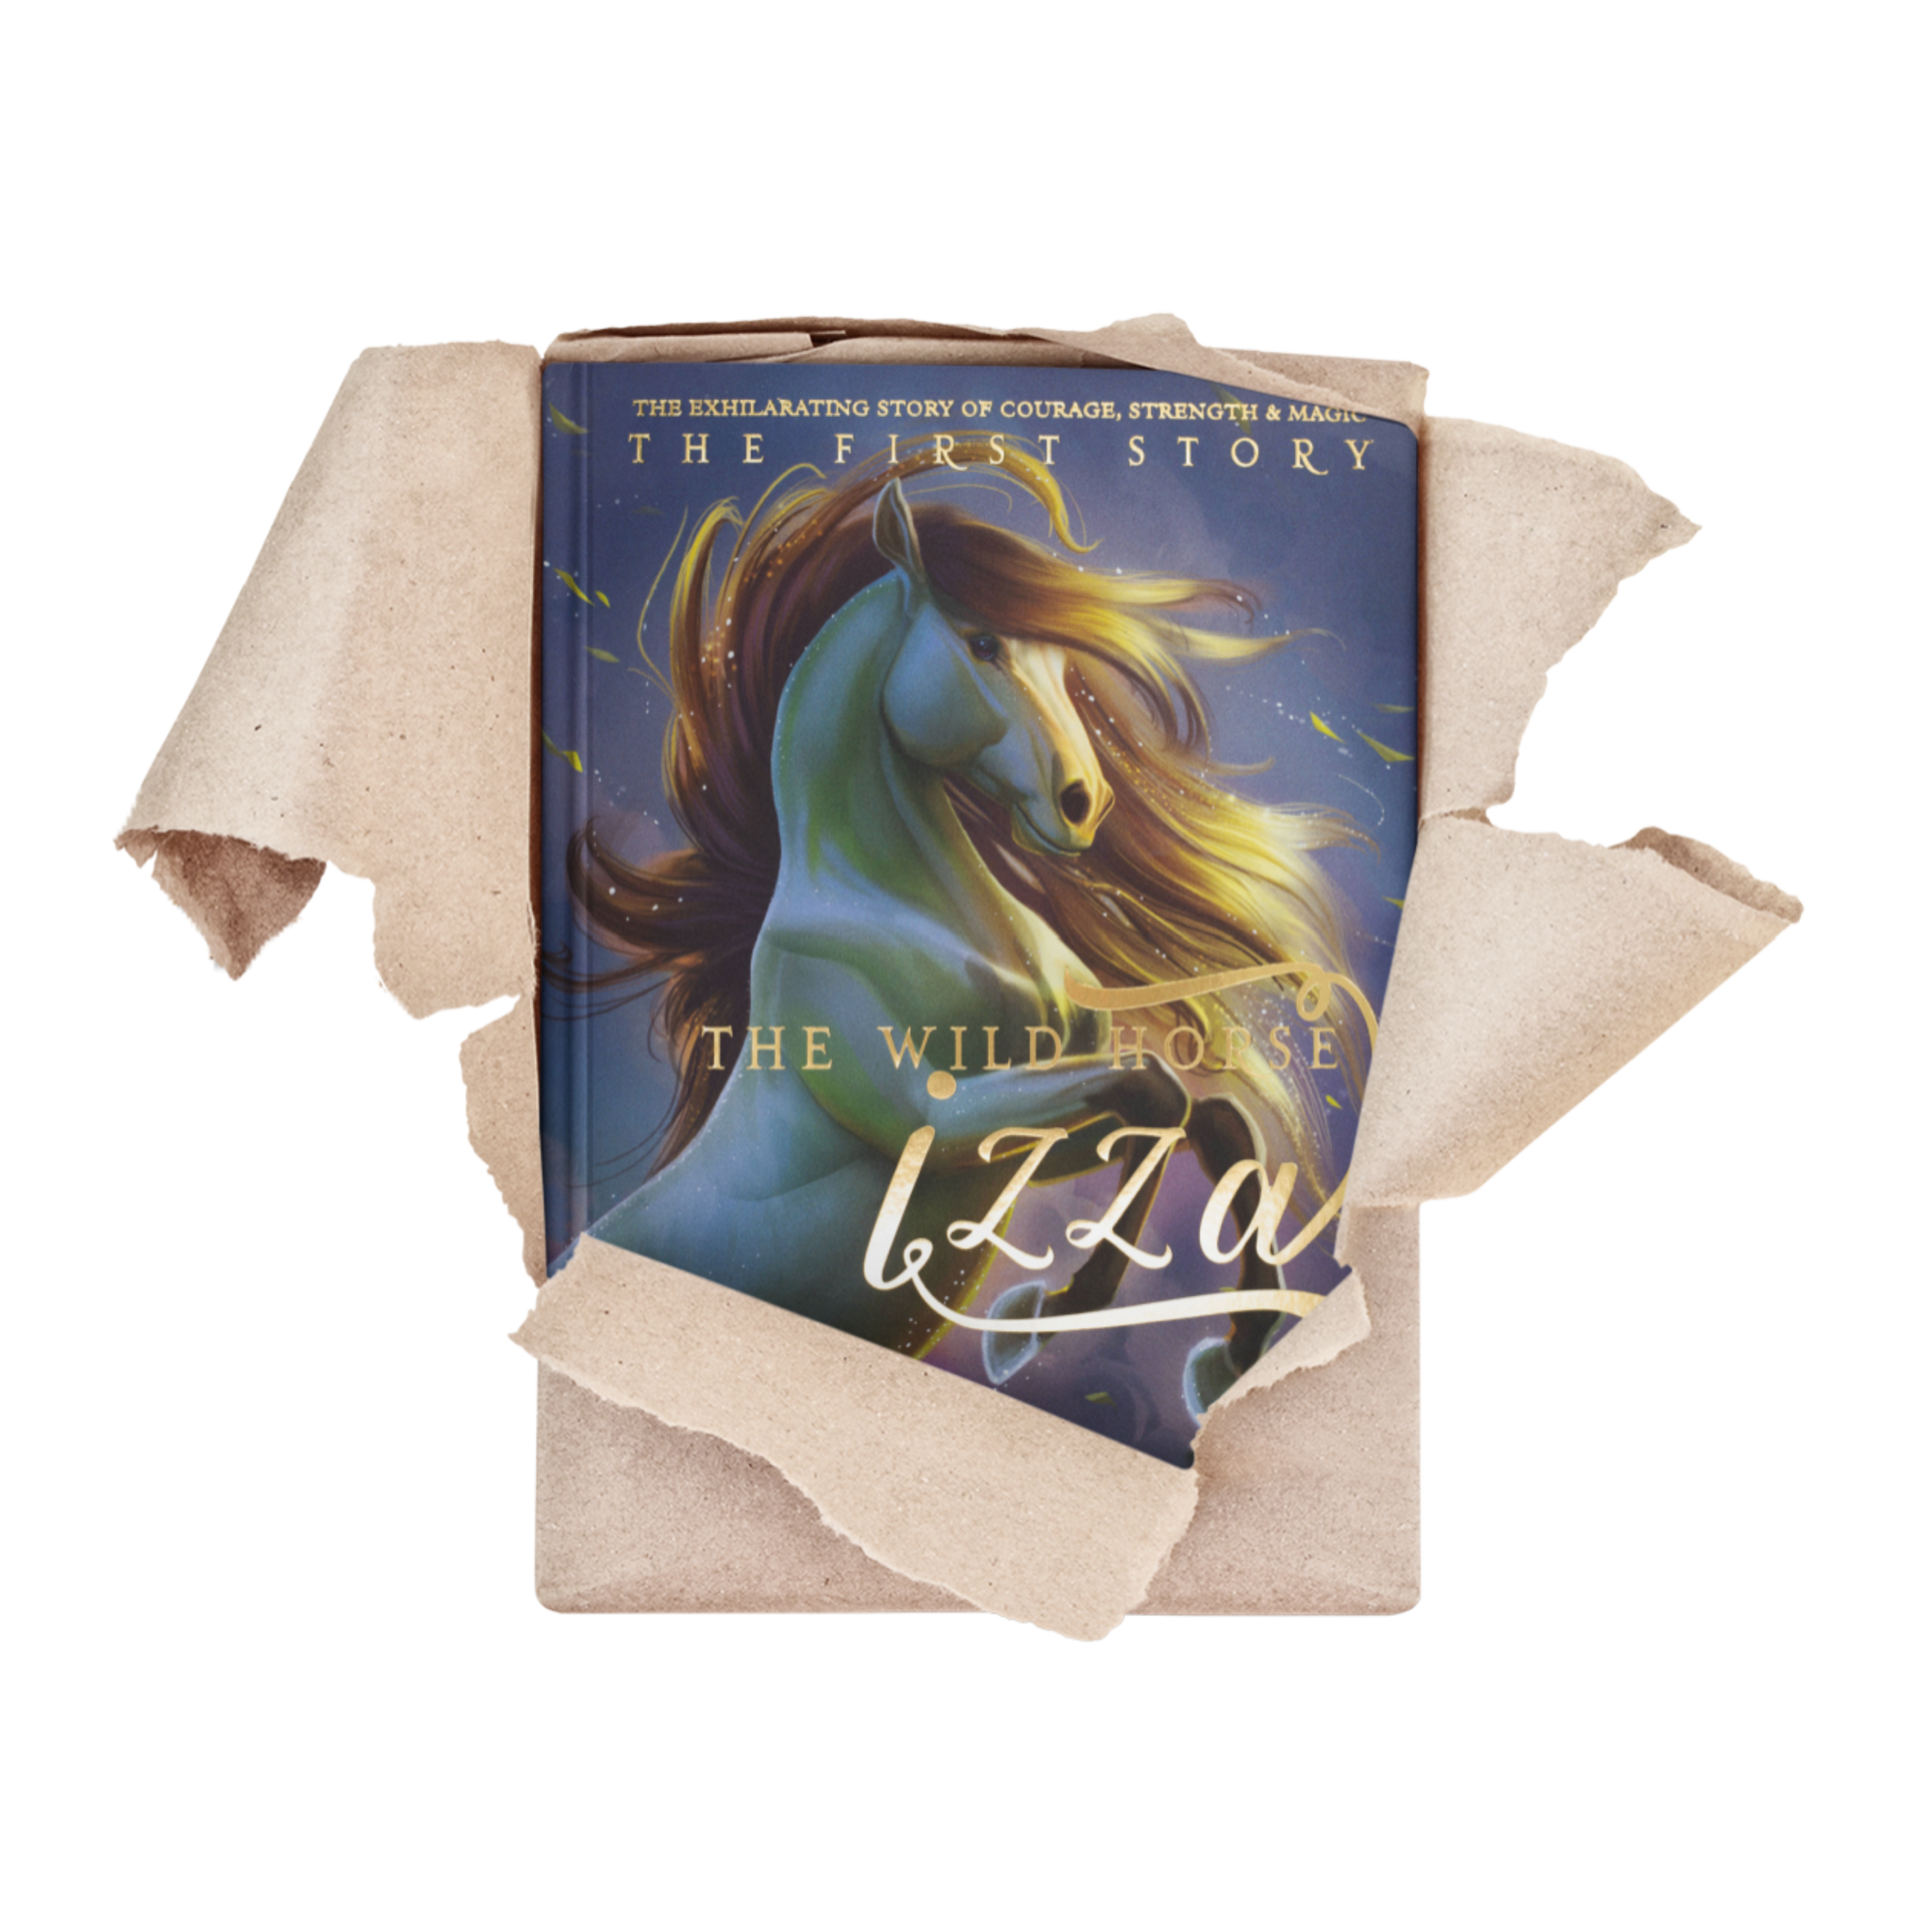 THE WILD HORSE IZZA - THE FIRST STORY